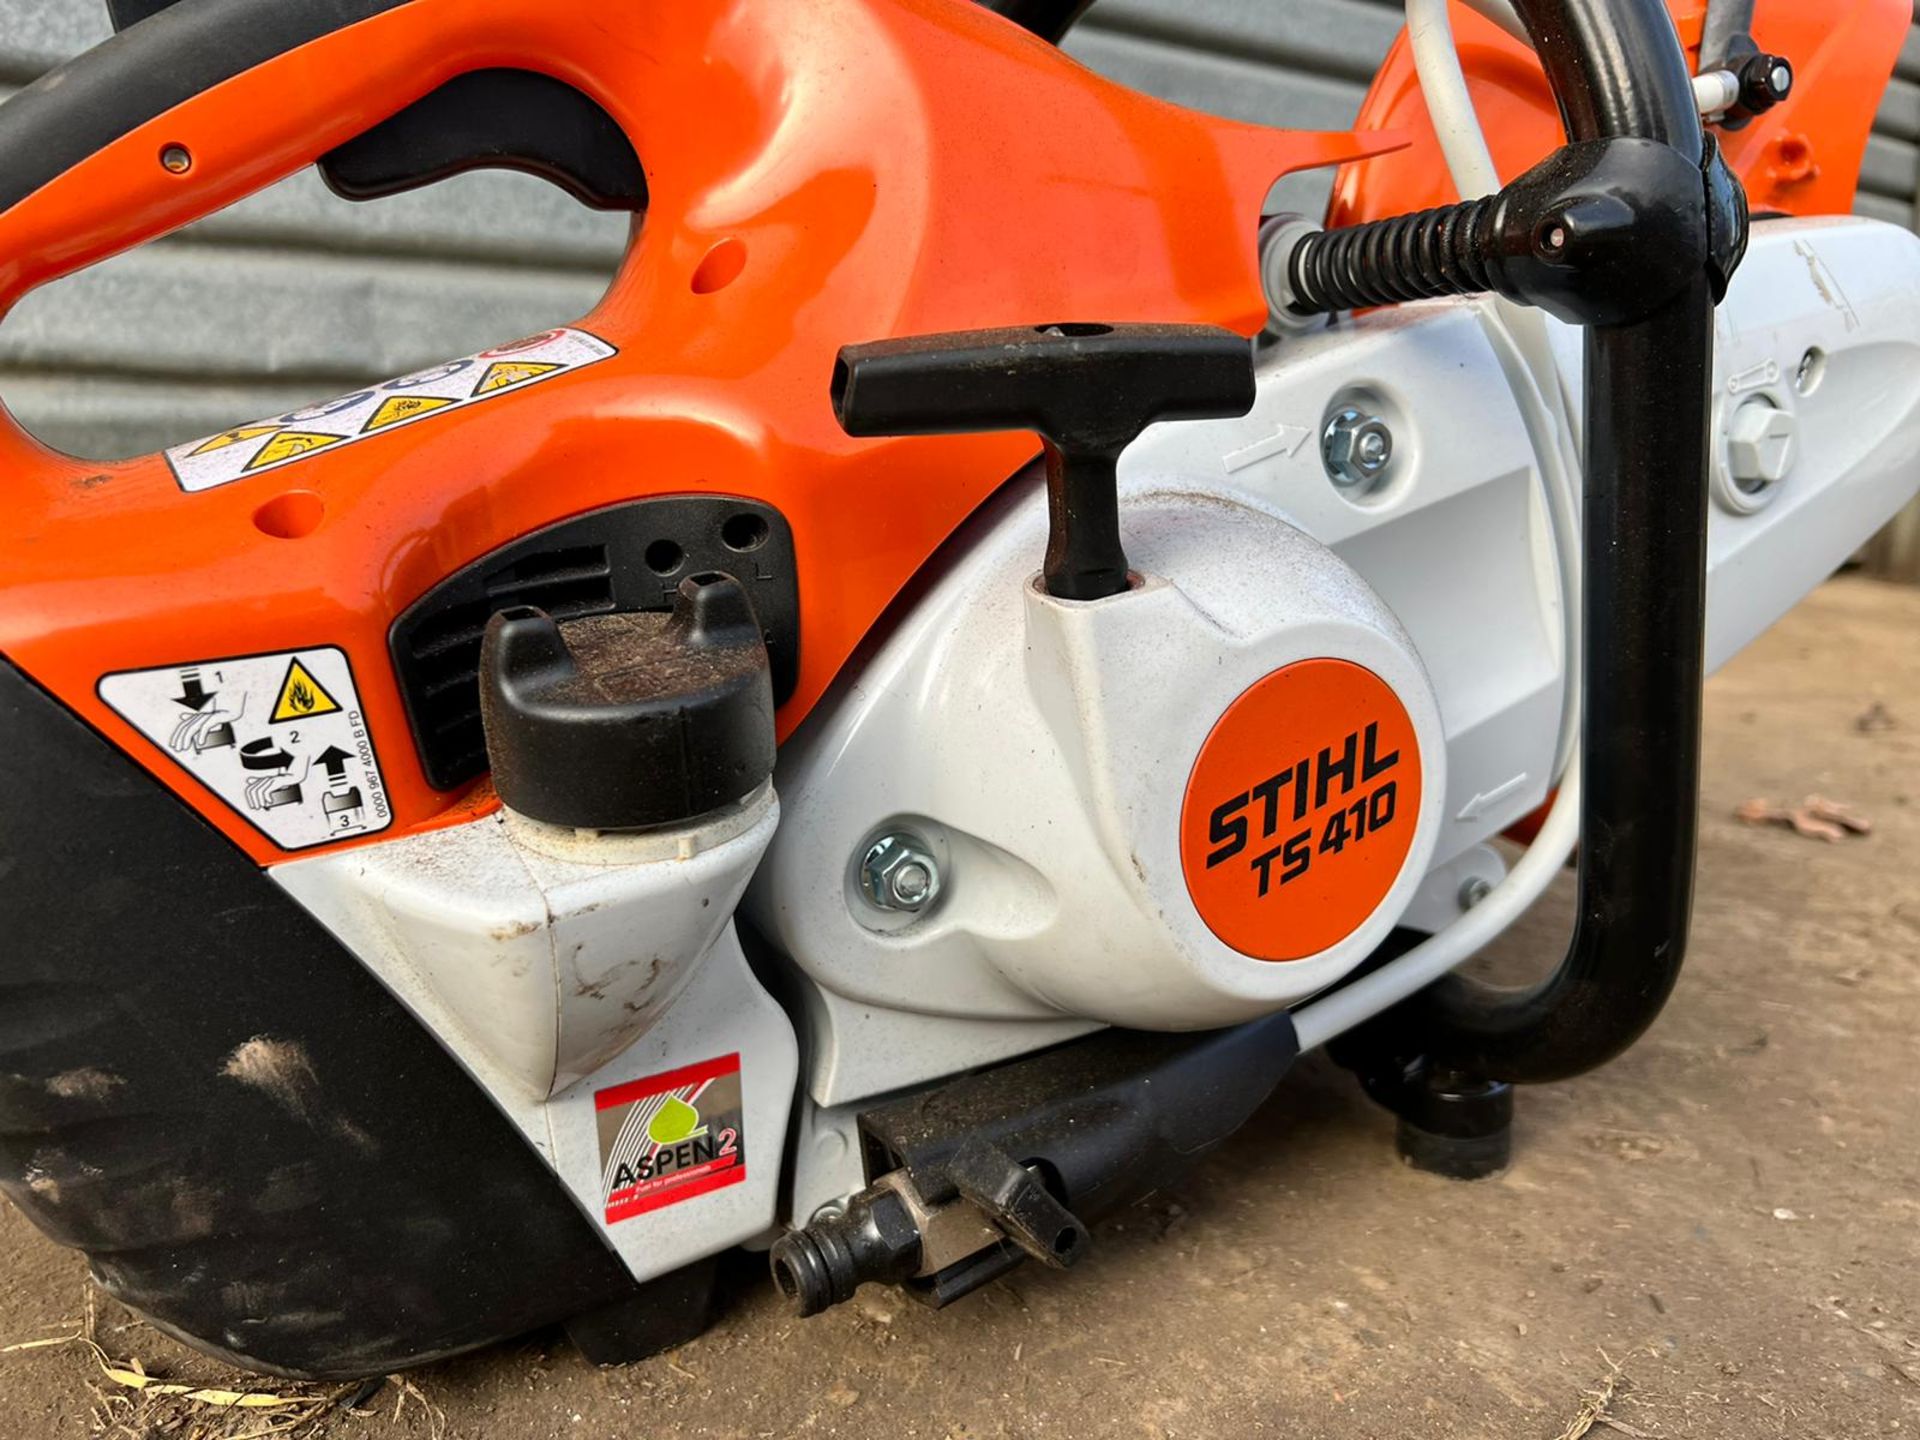 NEW AND UNUSED STIHL TS410 PETROL DISC CUTTER, MANUFACTURED 11/2021, C/W NEW 12" DIAMOND BLADE - Image 7 of 8